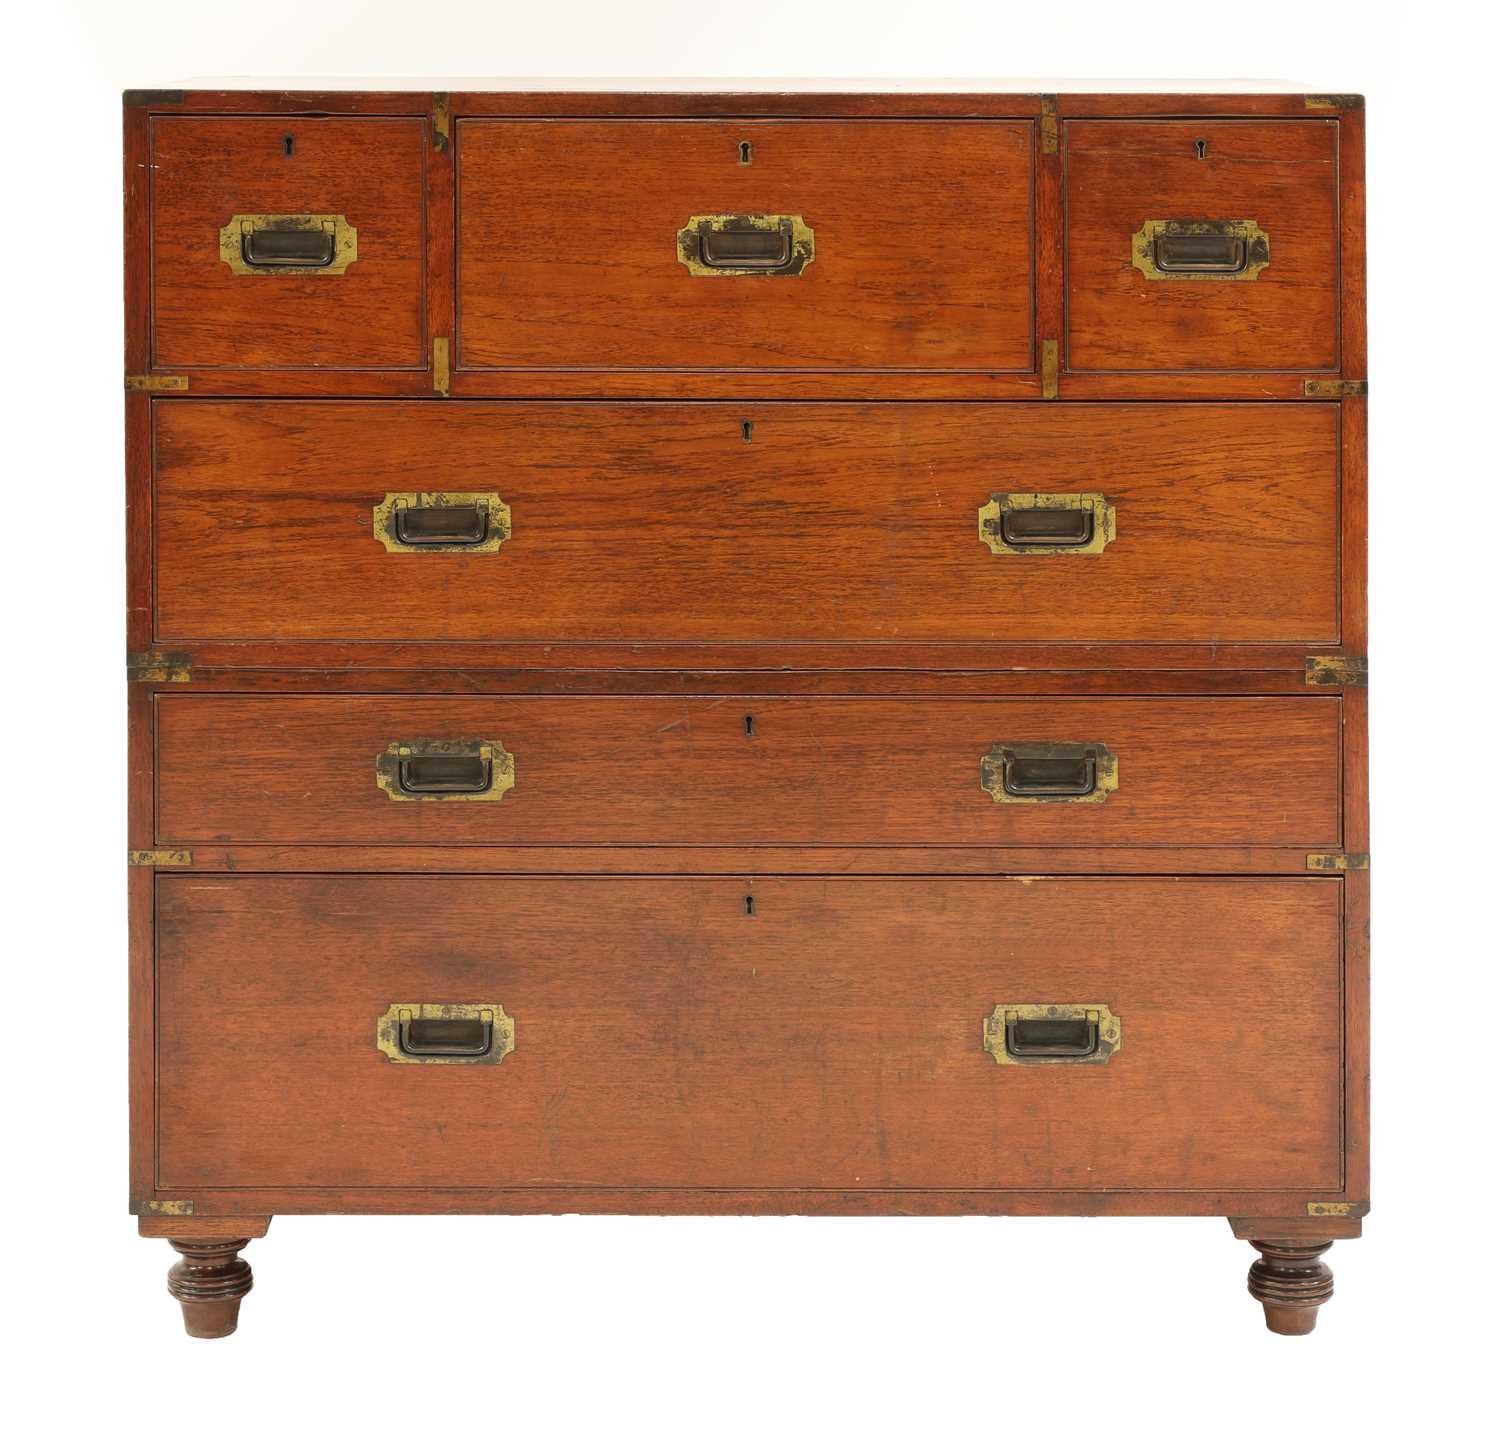 Lot 932 - A Victorian teak and brass-bound campaign secretaire chest